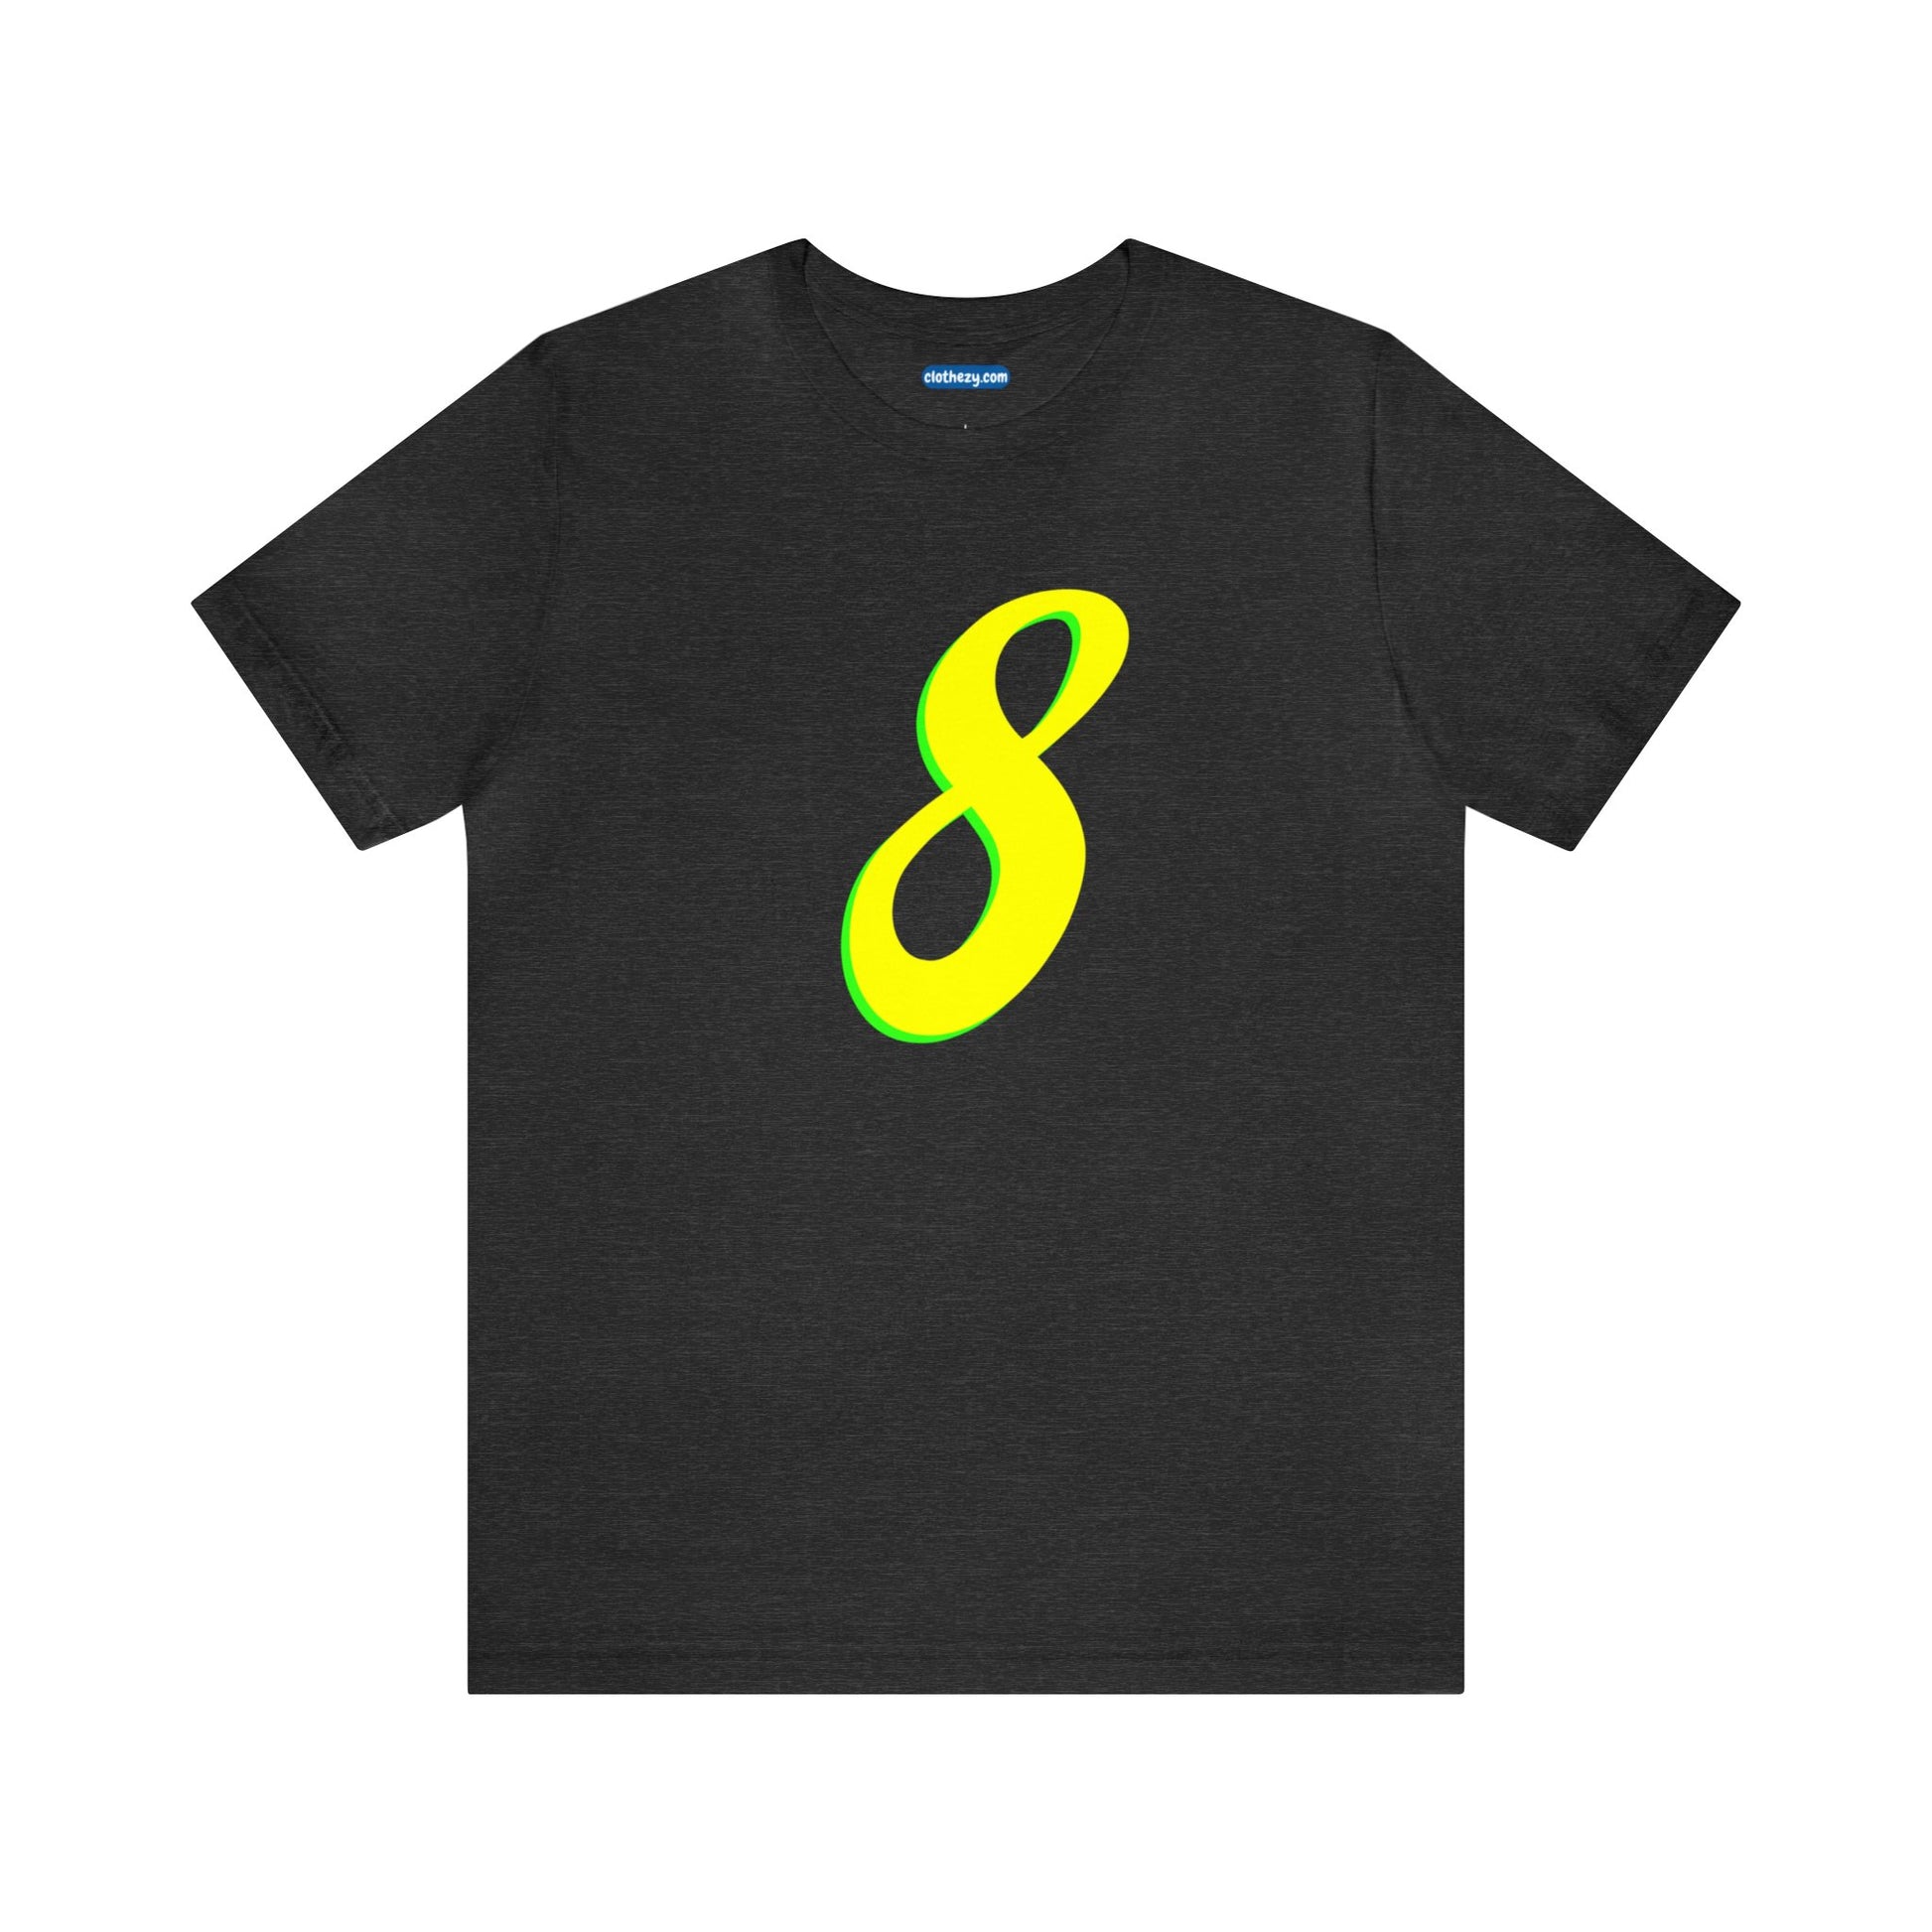 Number 8 Design - Soft Cotton Tee for birthdays and celebrations, Gift for friends and family, Multiple Options by clothezy.com in Gold Size Small - Buy Now